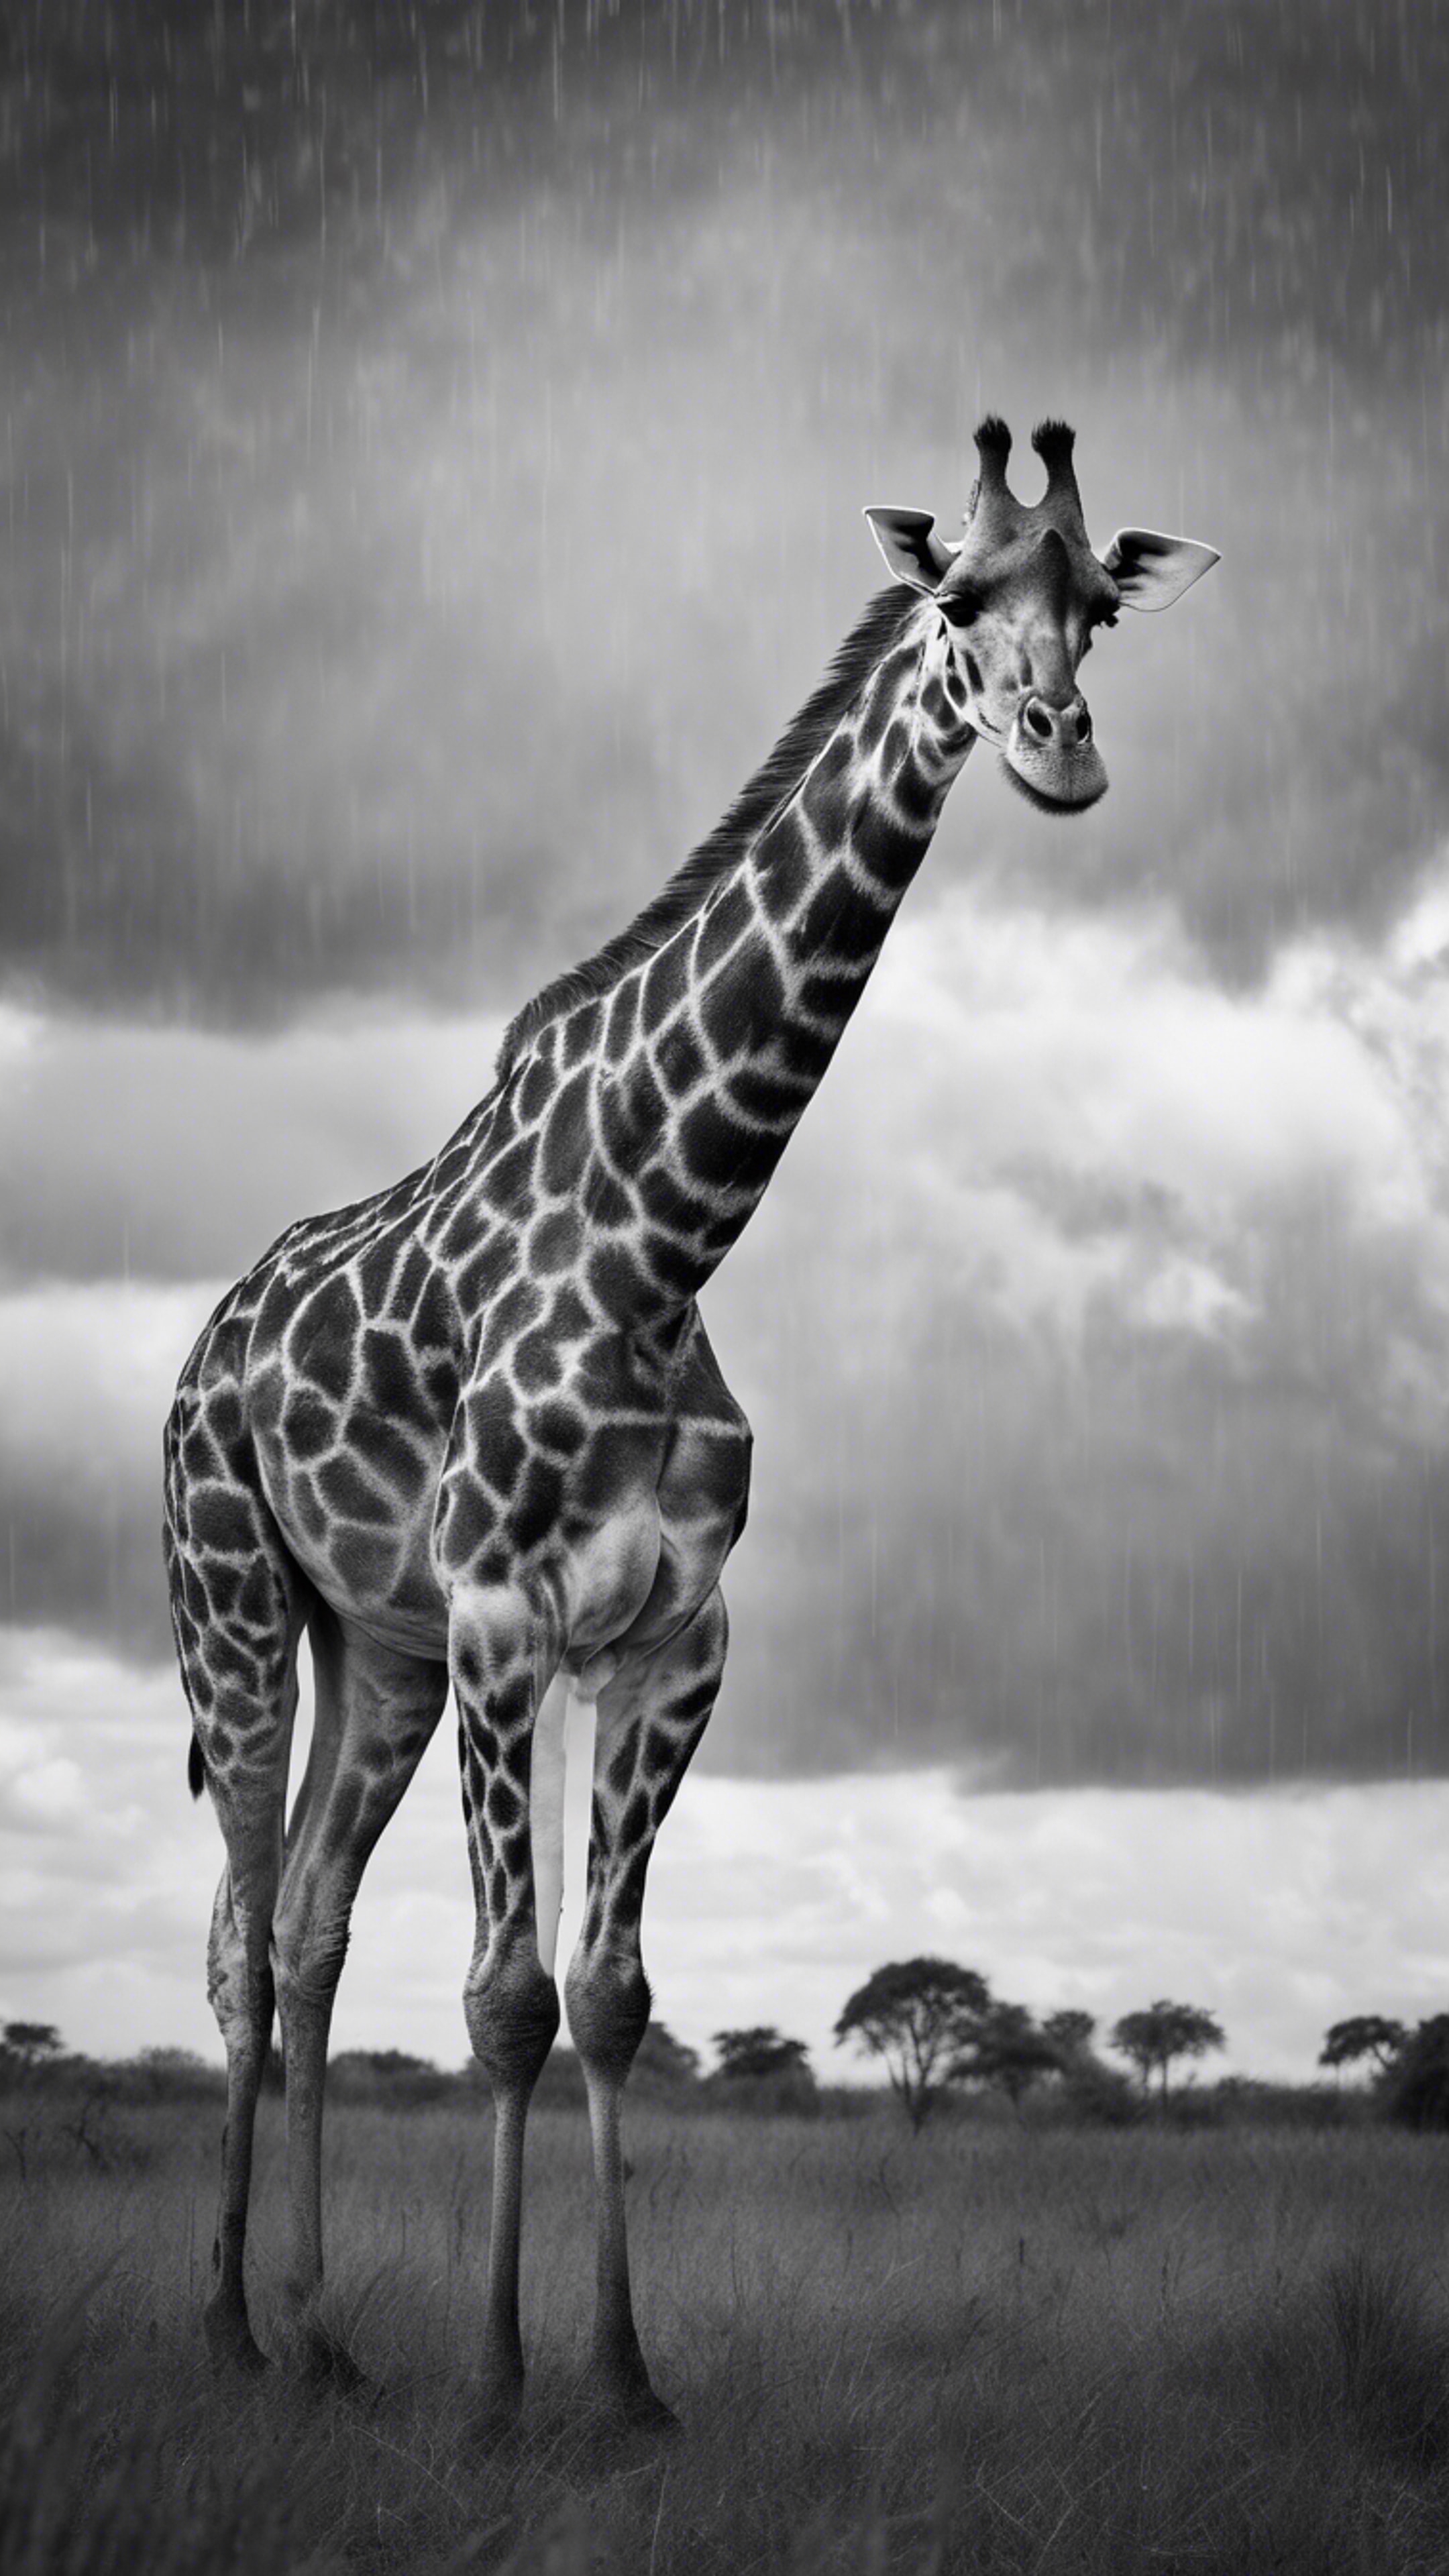 A beautifully photographed black and white image of a giraffe sauntering under rain clouds. Wallpaper[33f5eecce55b4c40952e]